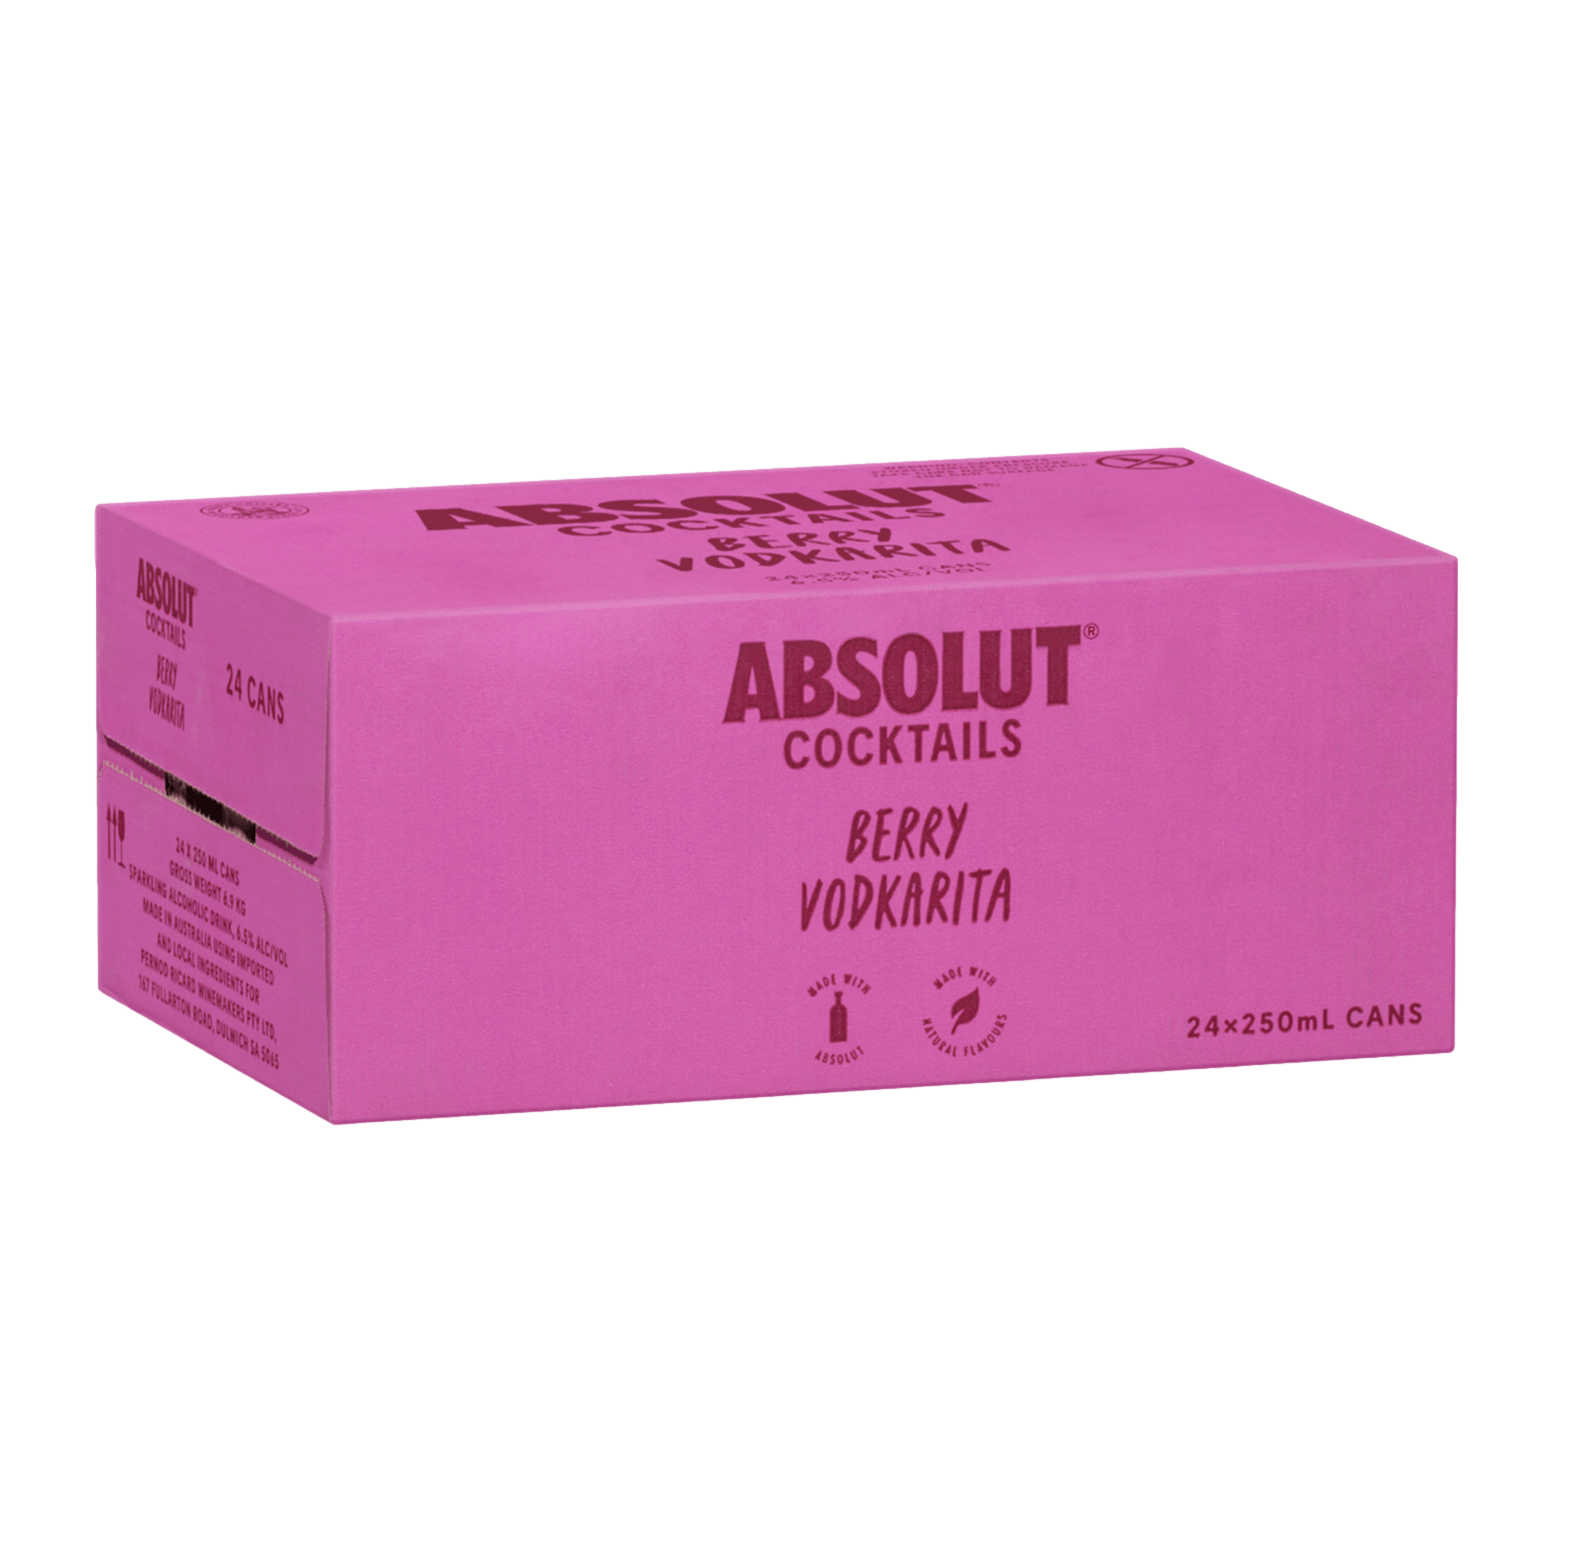 Absolut Cocktails Berry Vodkarita 250ml Can Case of 24